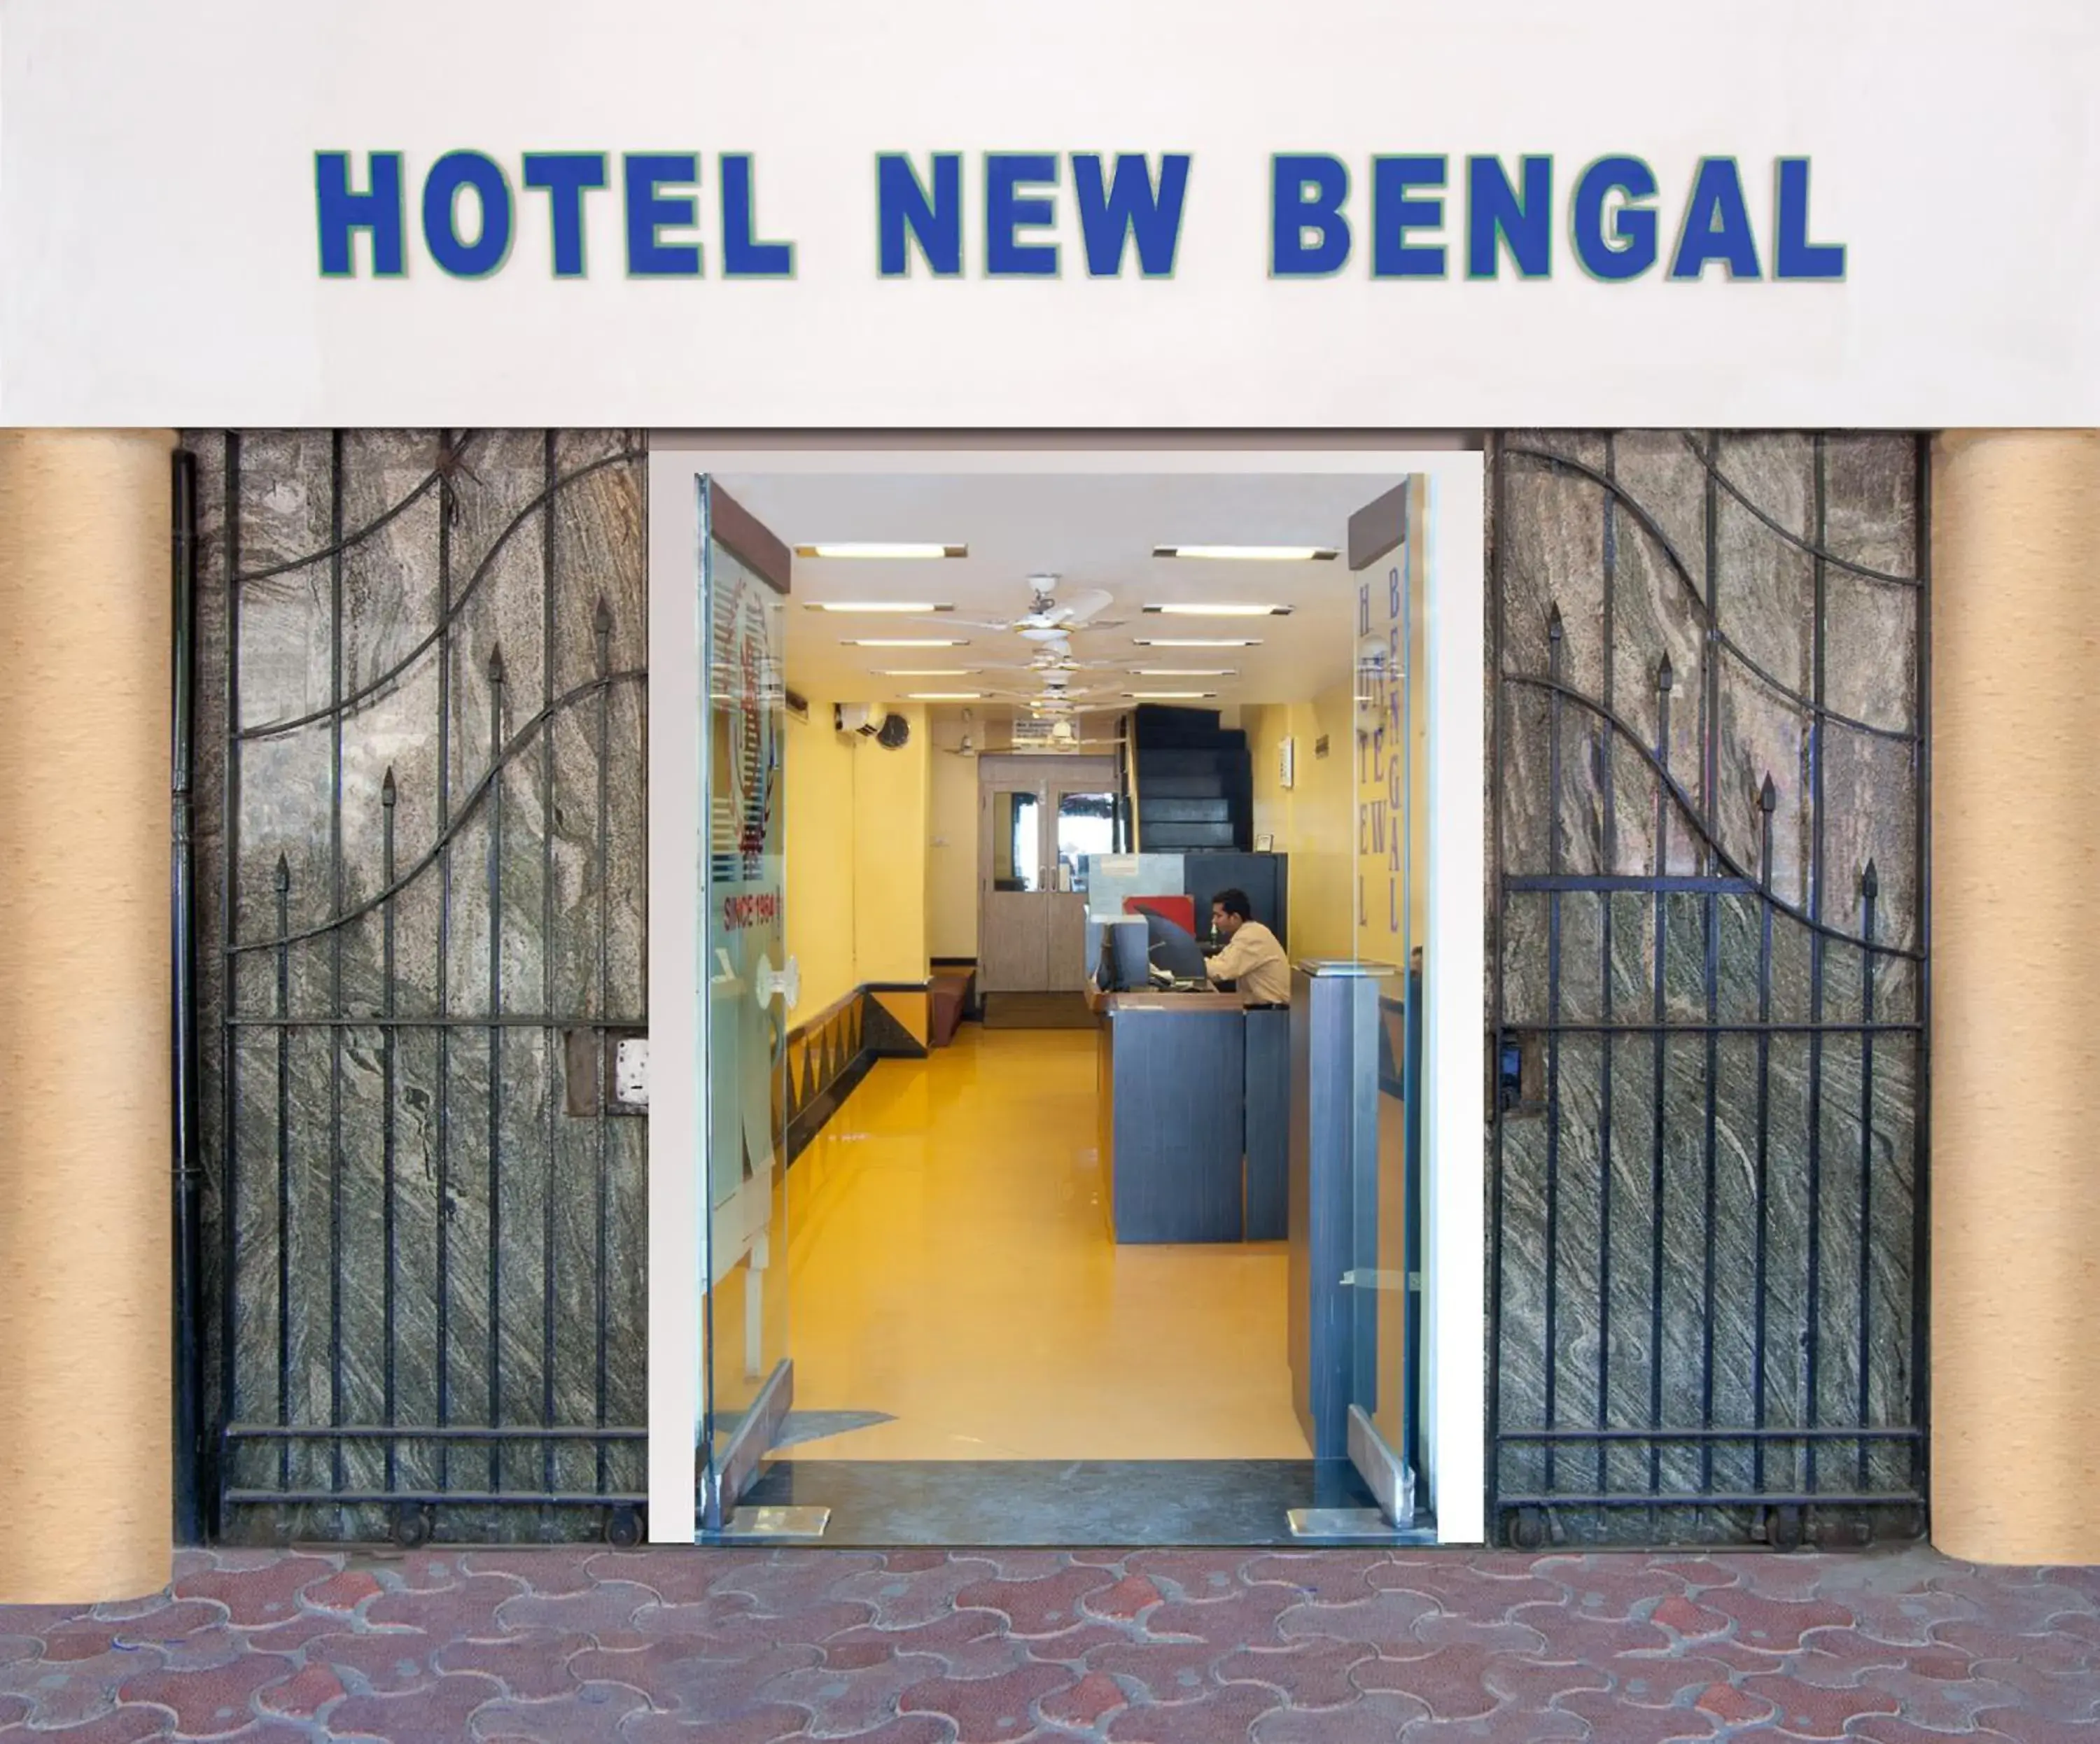 Facade/entrance in New Bengal Hotel